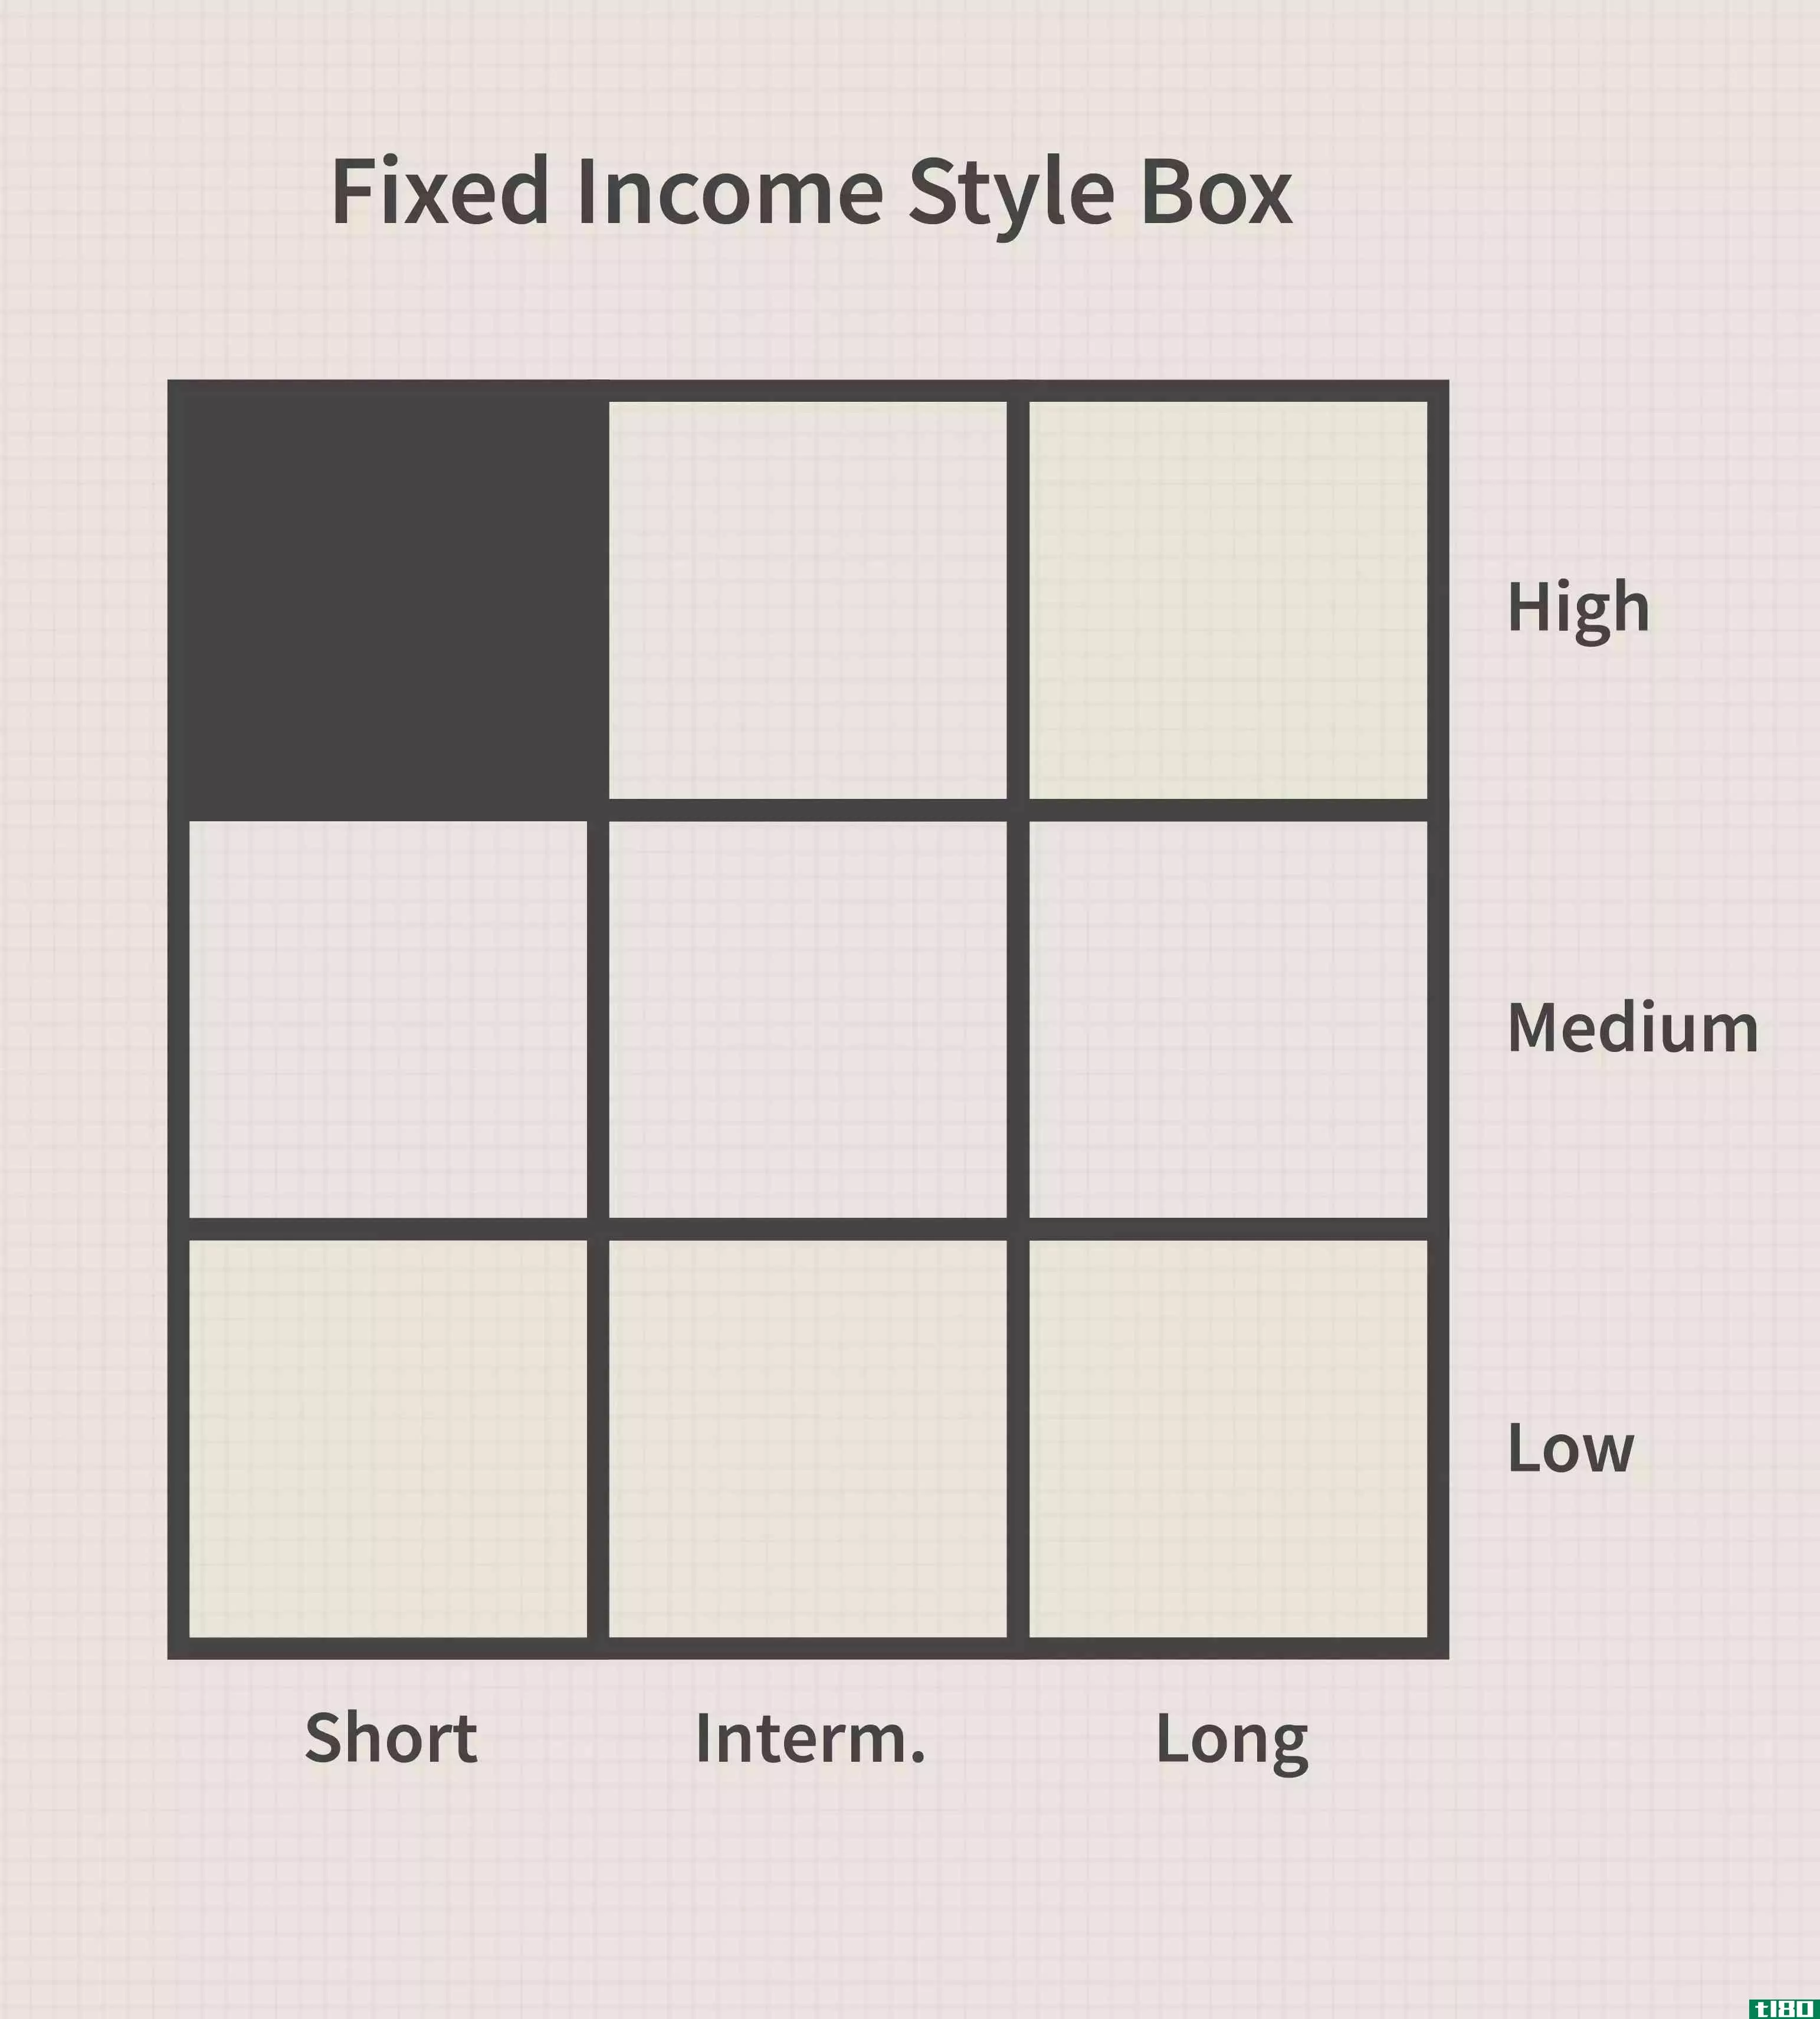 Fixed Income Style Box